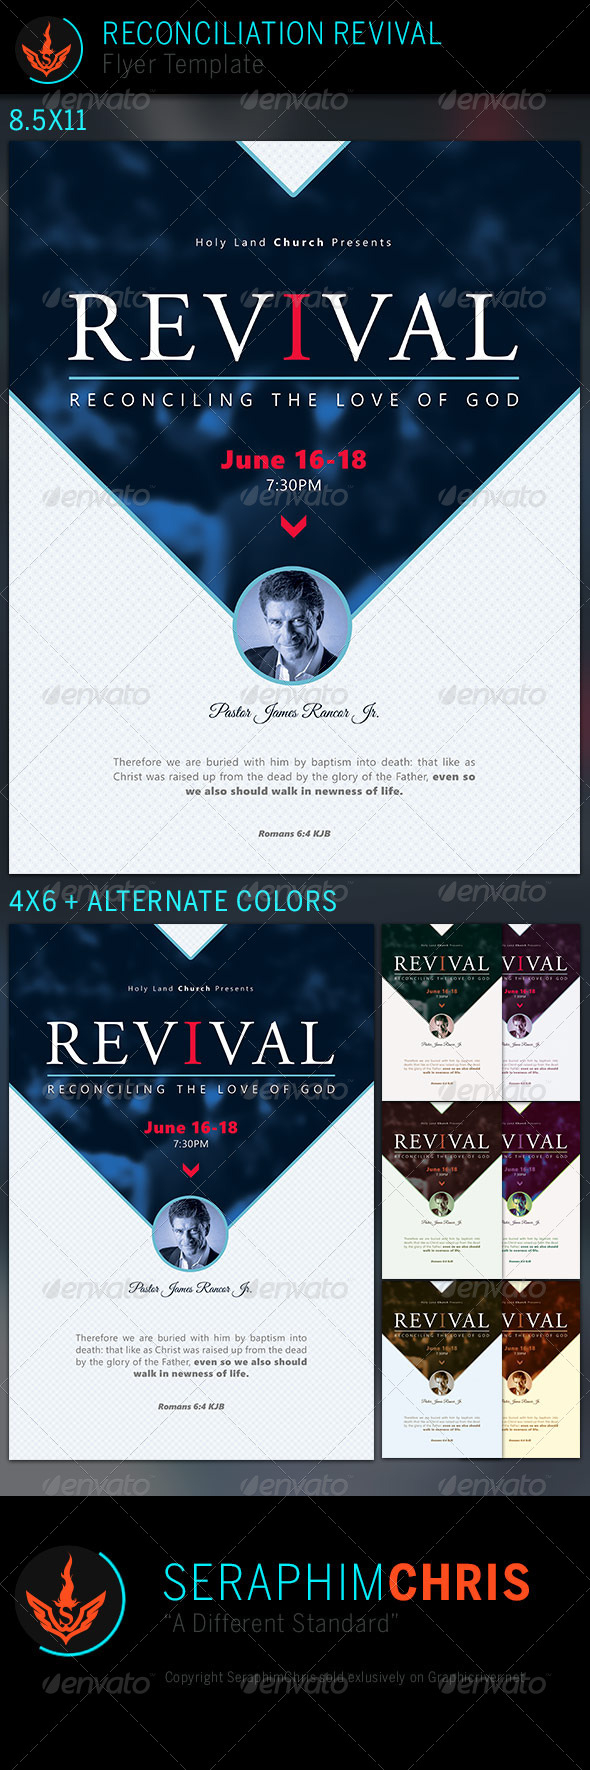 Reconciliation Revival: Church Flyer Template Intended For Church Revival Flyer Template